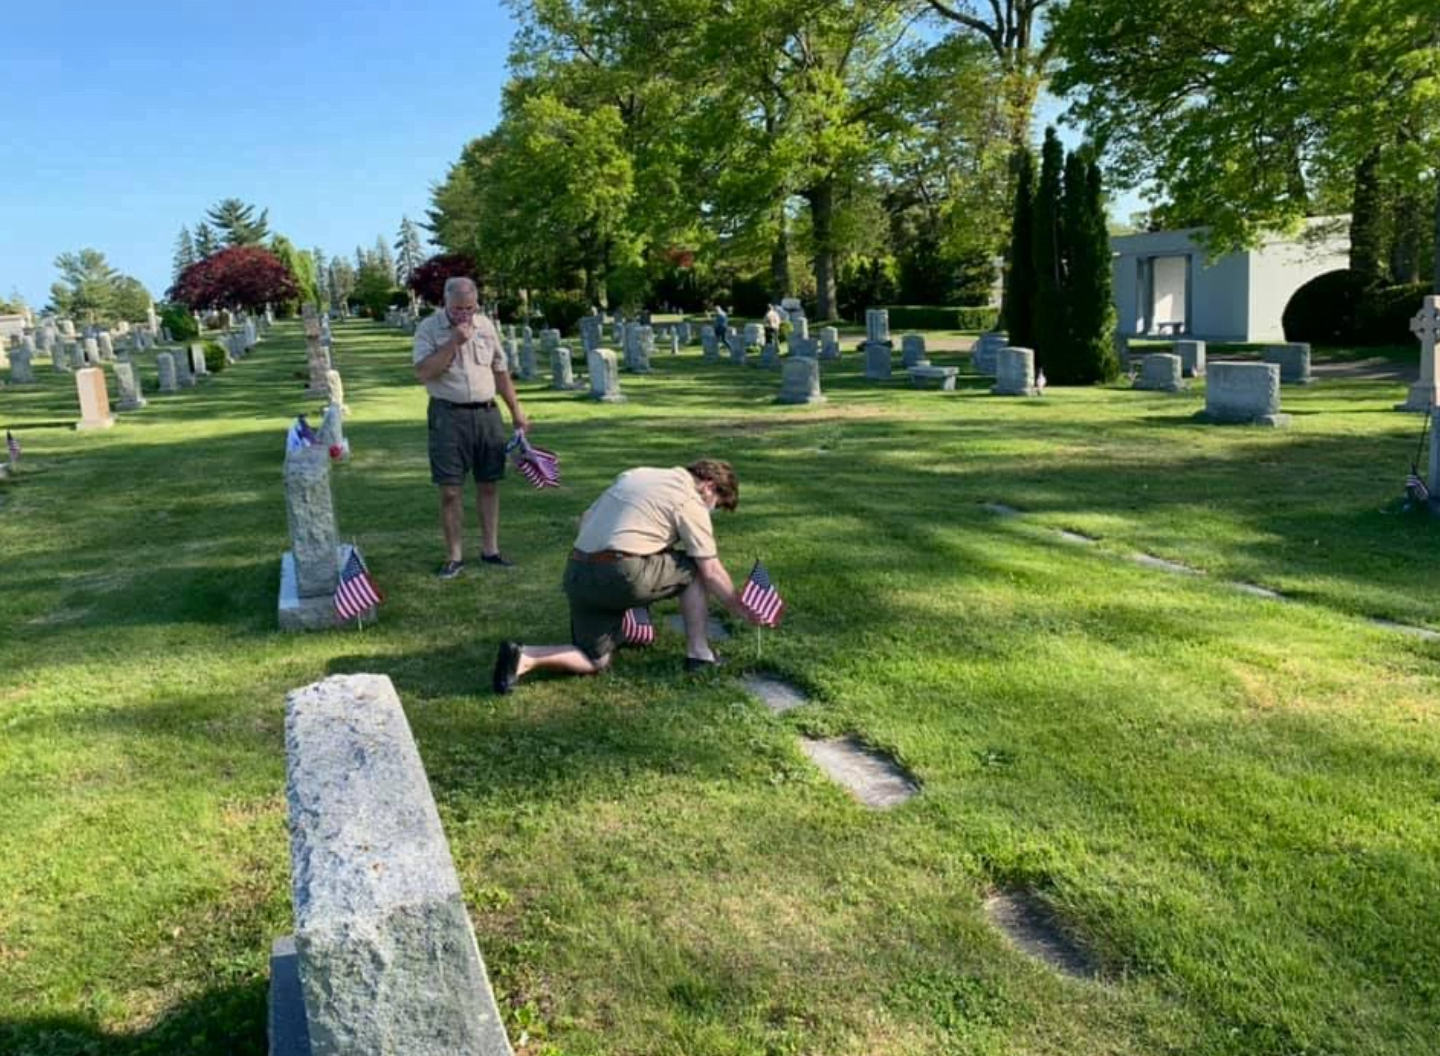 Troop 10, Eagle Scout, Ryan Hays locates a foot stone with a Veteran marker and places a flag in observance of Memorial Day.